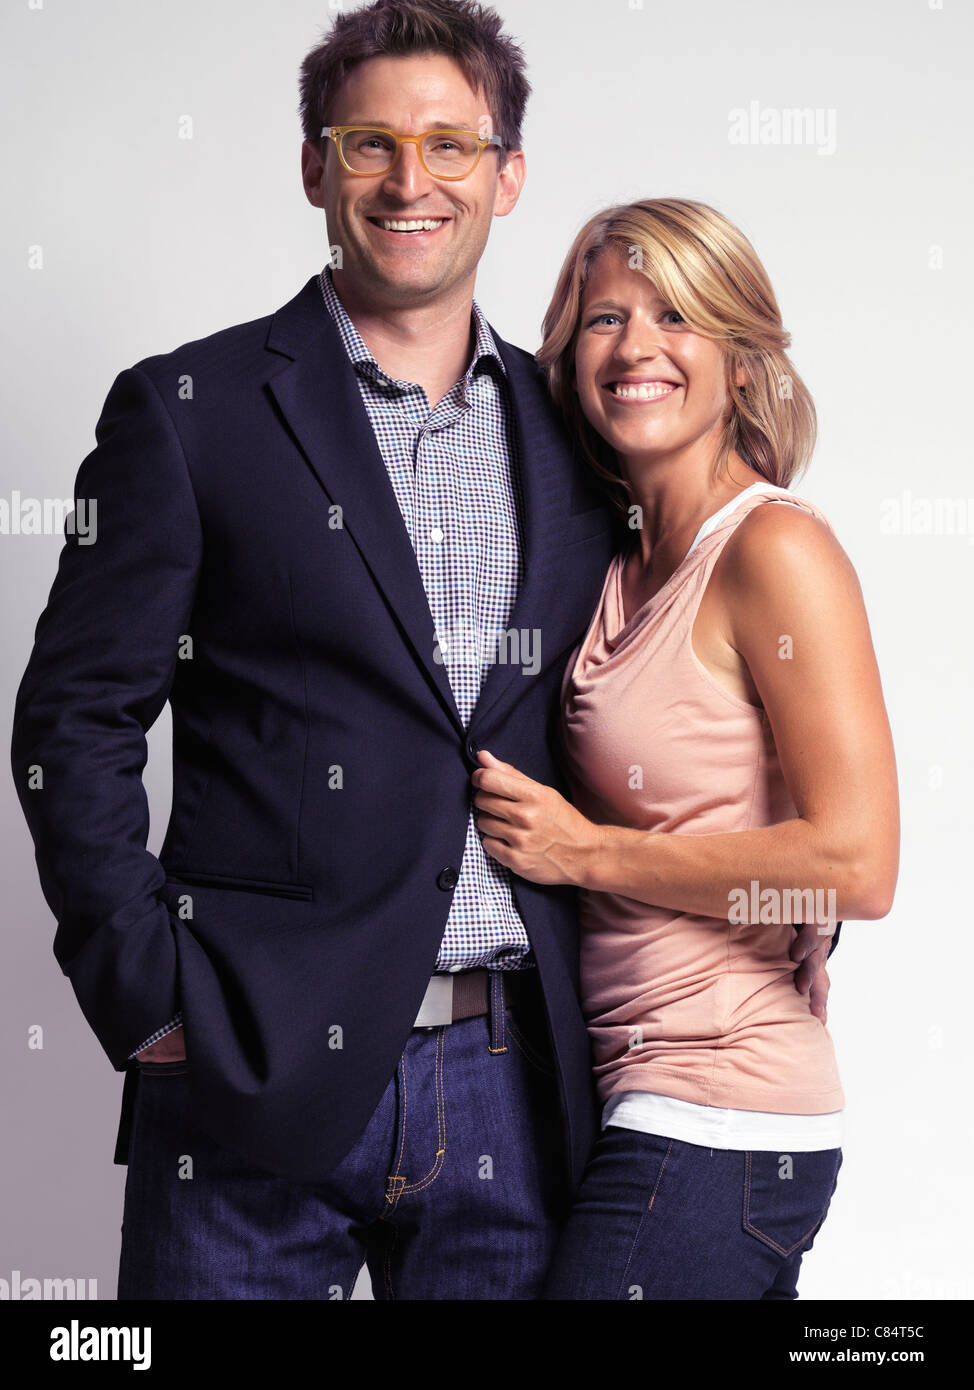 Smiling casually dressed happy young woman and a man isolated on gray background Stock Photo